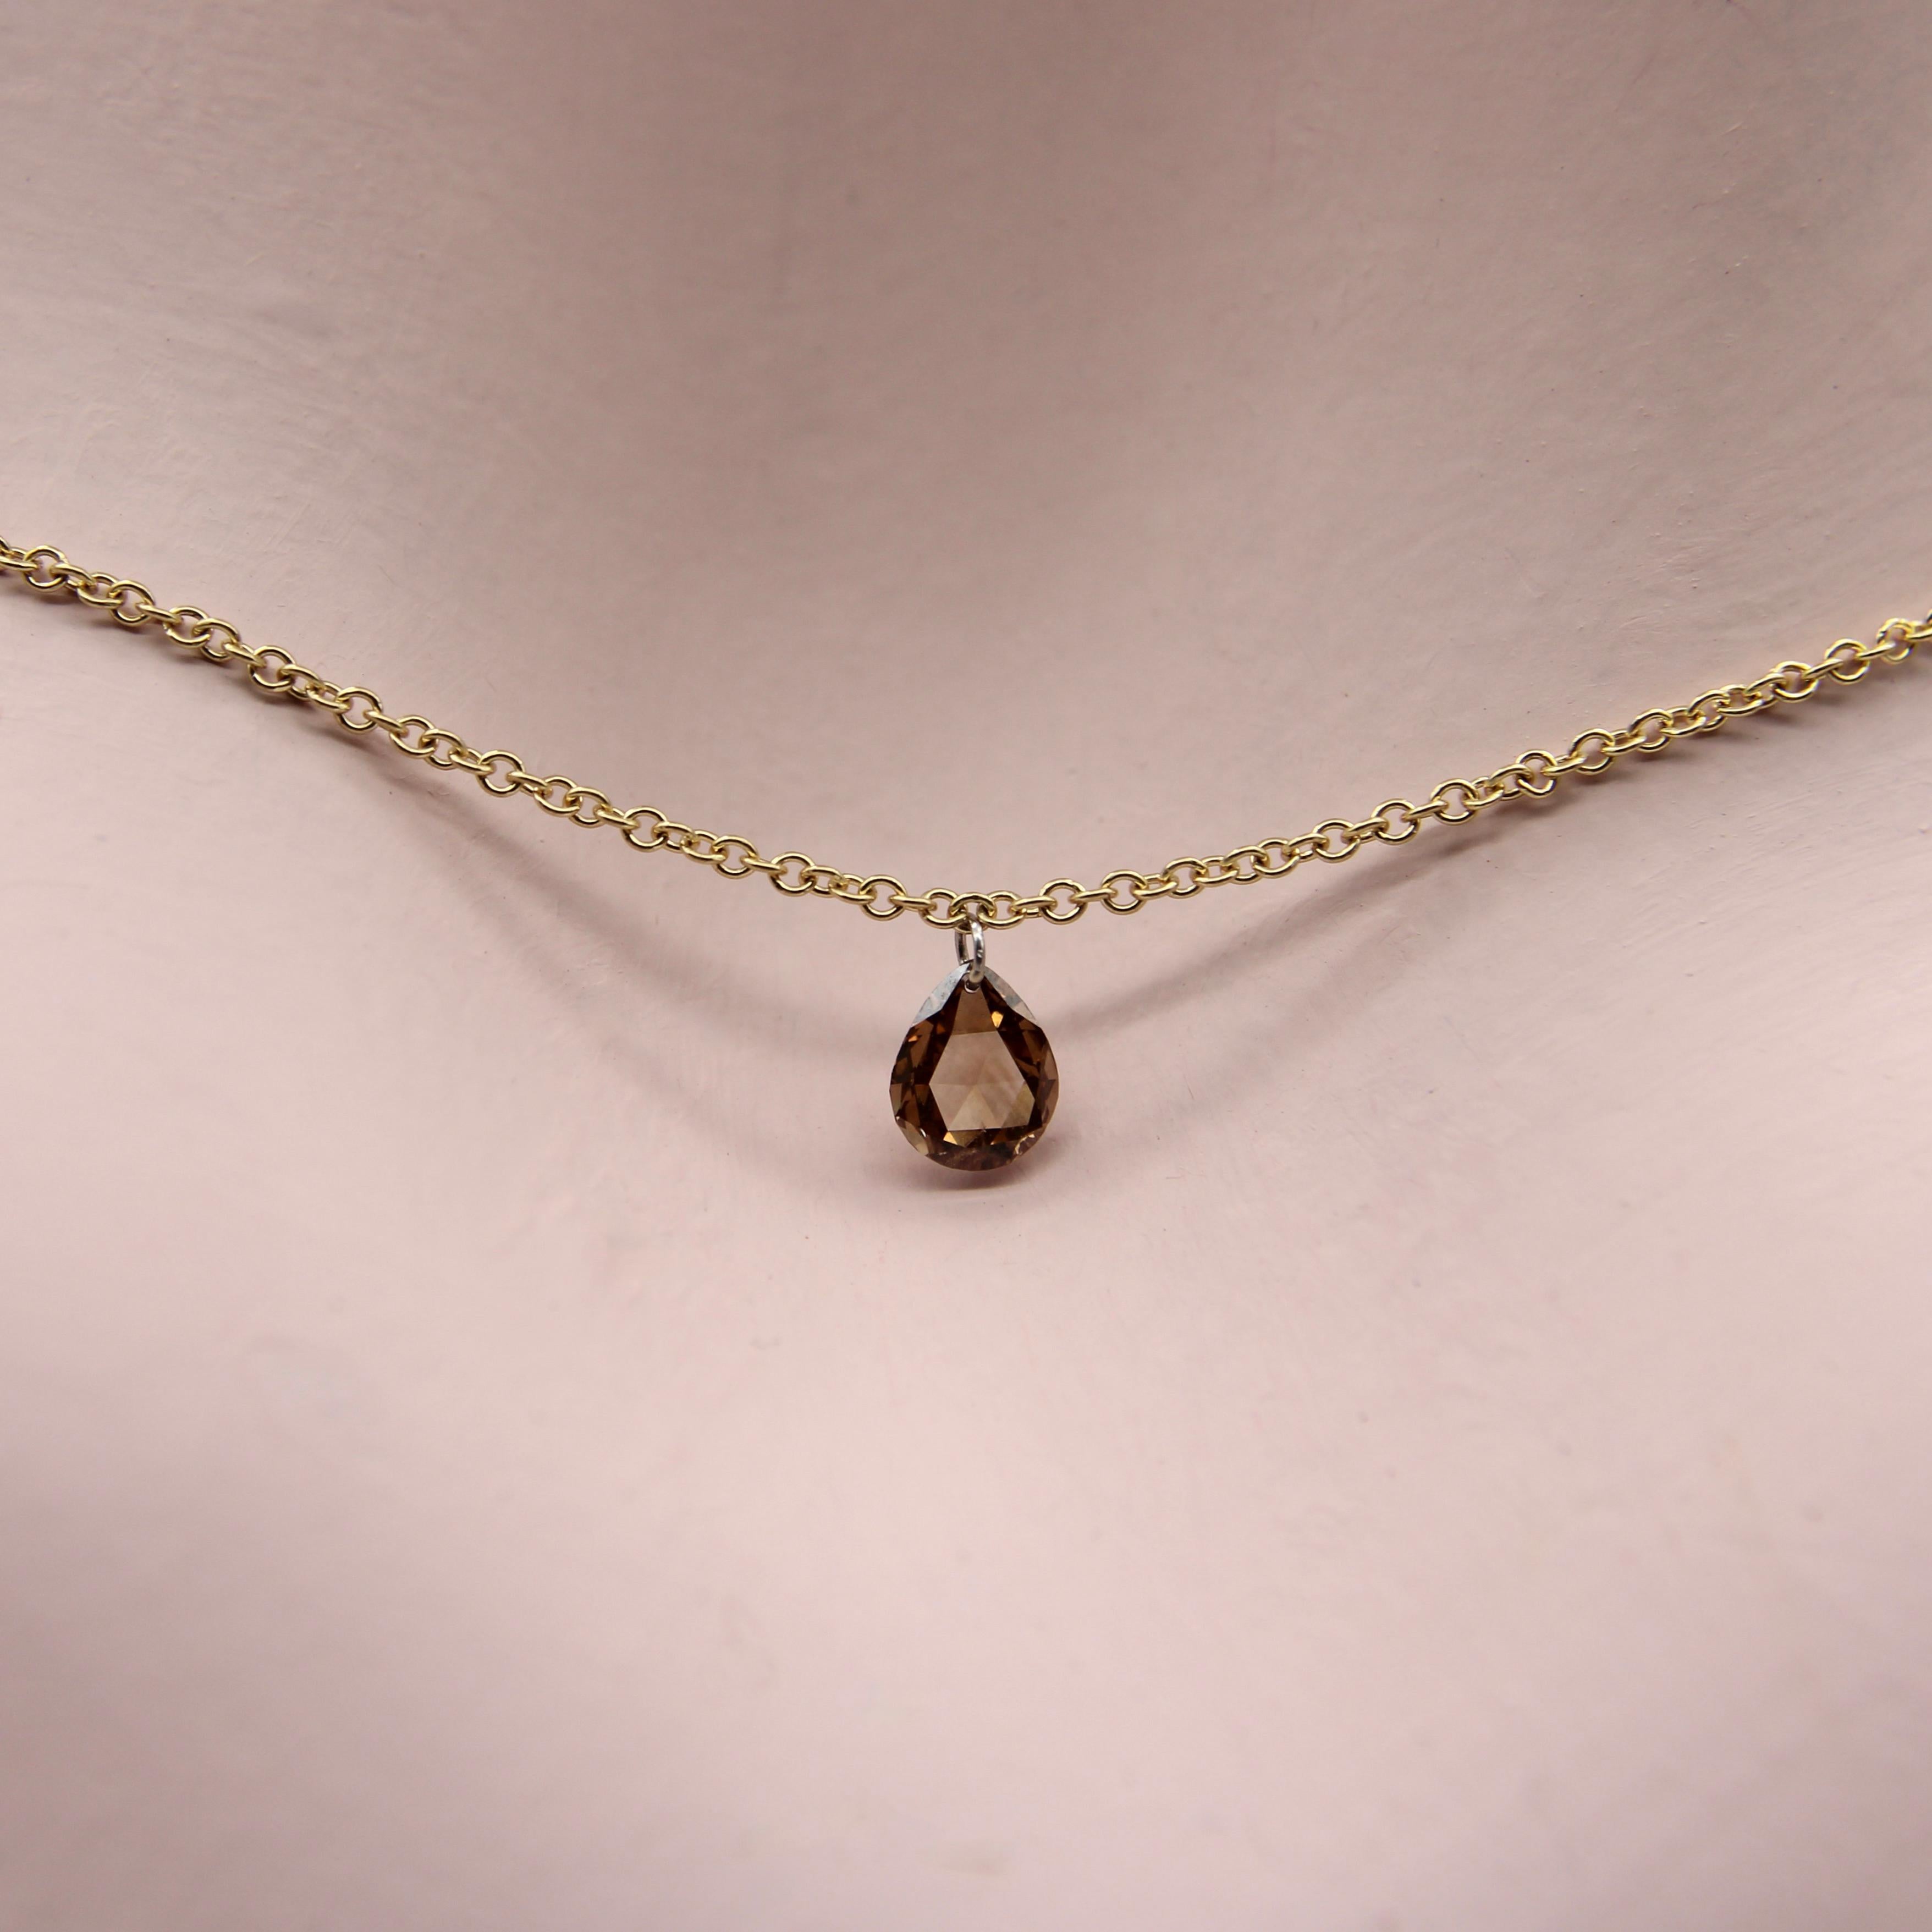 Pear Shaped Dangling Chocolate Rose Cut Diamond on 18K Gold Chain  For Sale 3